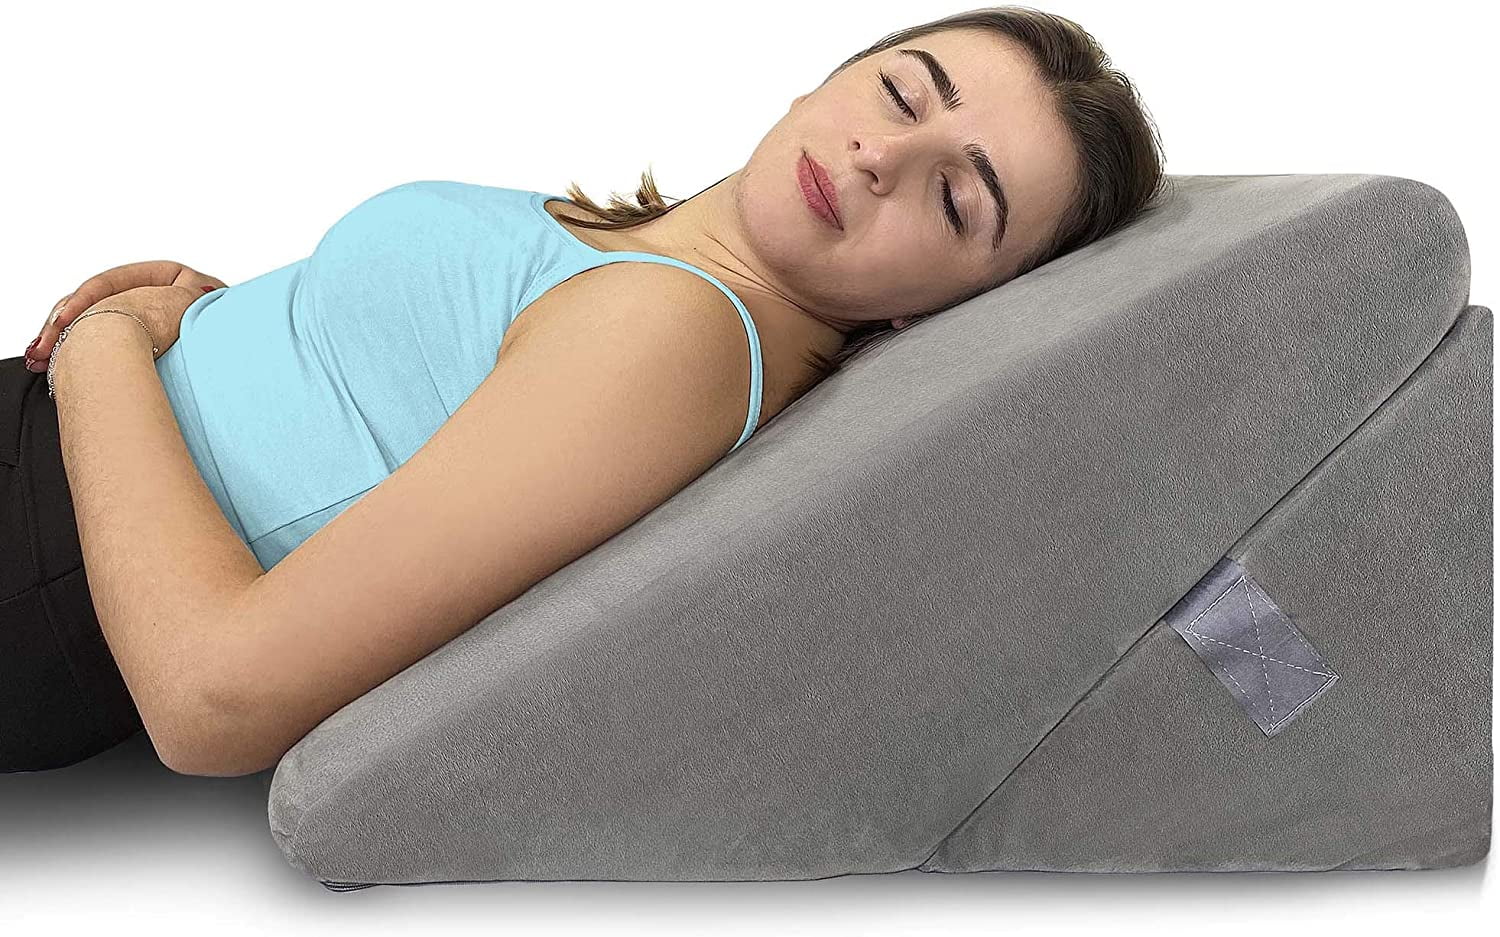 Bed Wedge Pillow – 2 Separate Memory Foam Incline Cushions, System for  Legs, Knees and Back Support Pillow  Acid Reflux, Anti Snoring, Heartburn,  Reading – Machine Washable, Grey Grey 23.6x23.6x12, 18.7x23.6x7.7